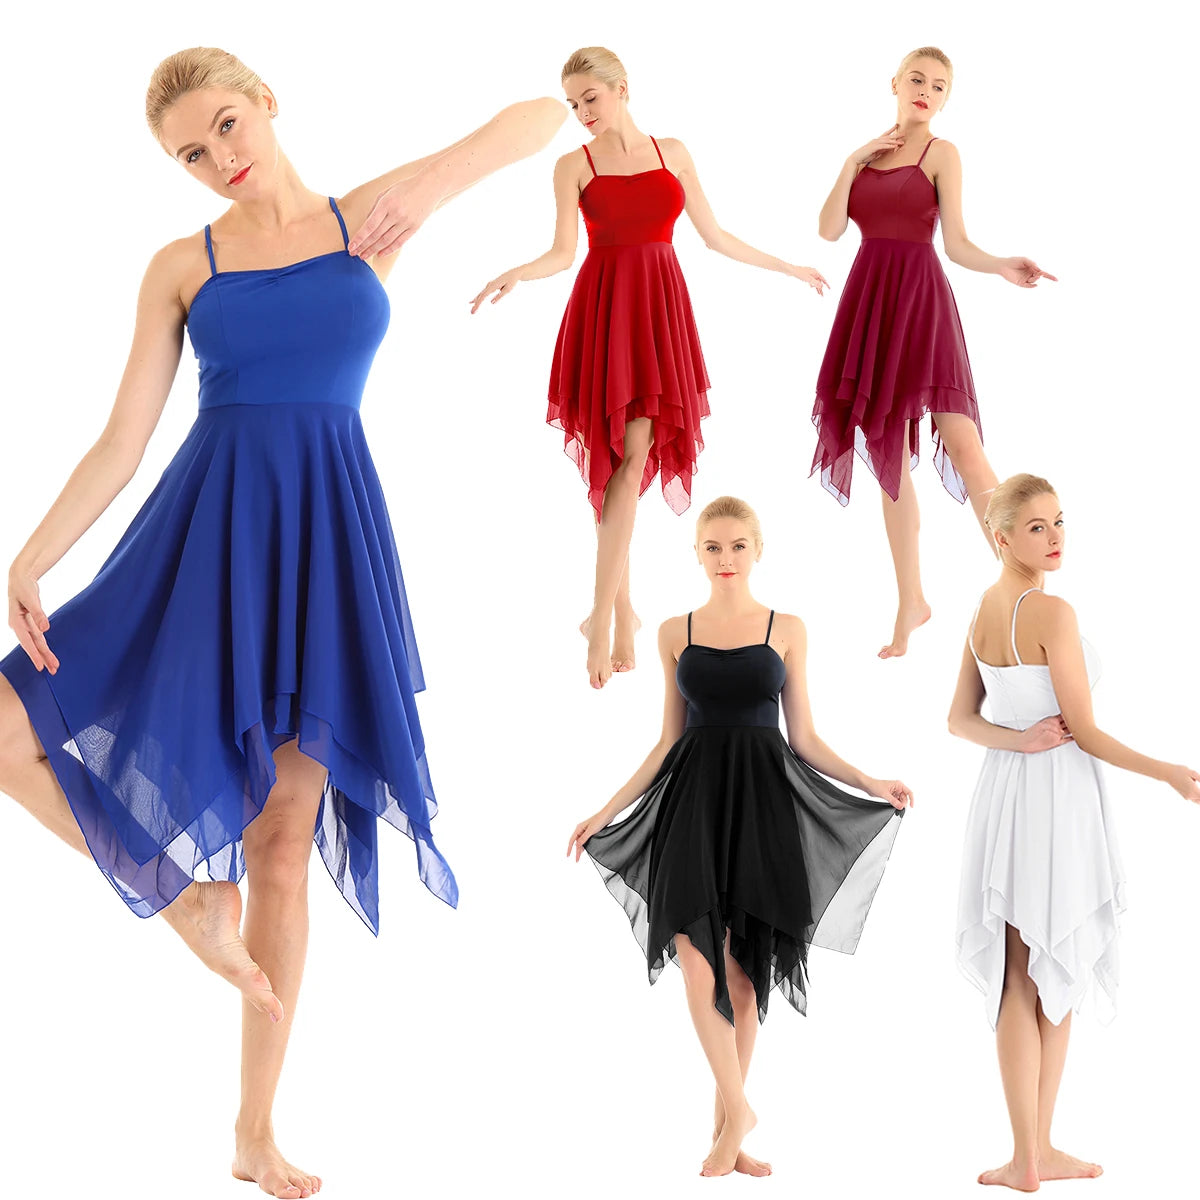 View All Costumes & Accessories  Contemporary dance costumes, Dance  outfits, Contemporary costumes